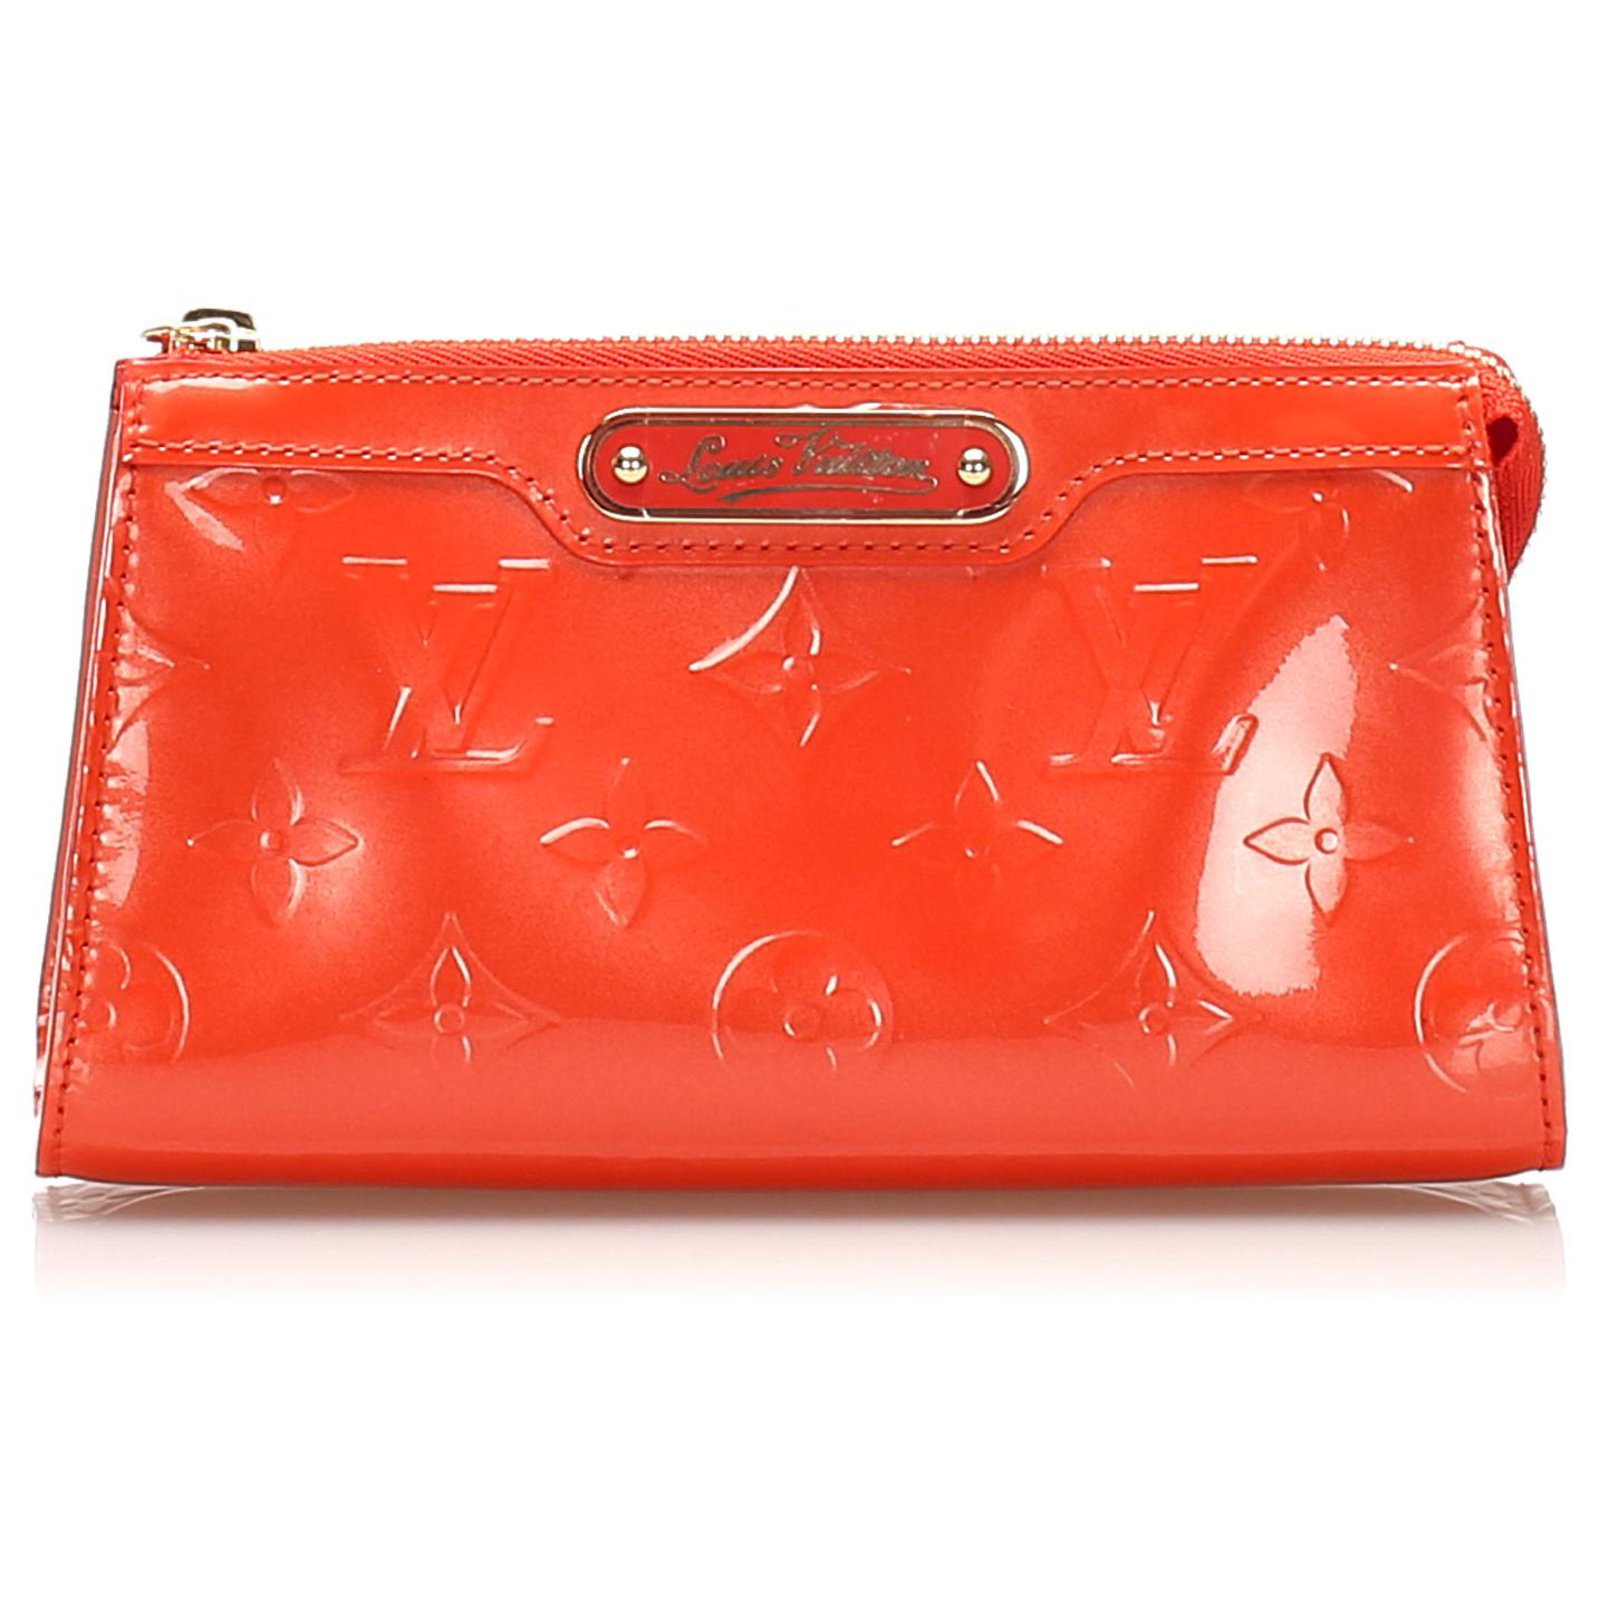 Monogram Vernis Trousse Cosmetic Pouch